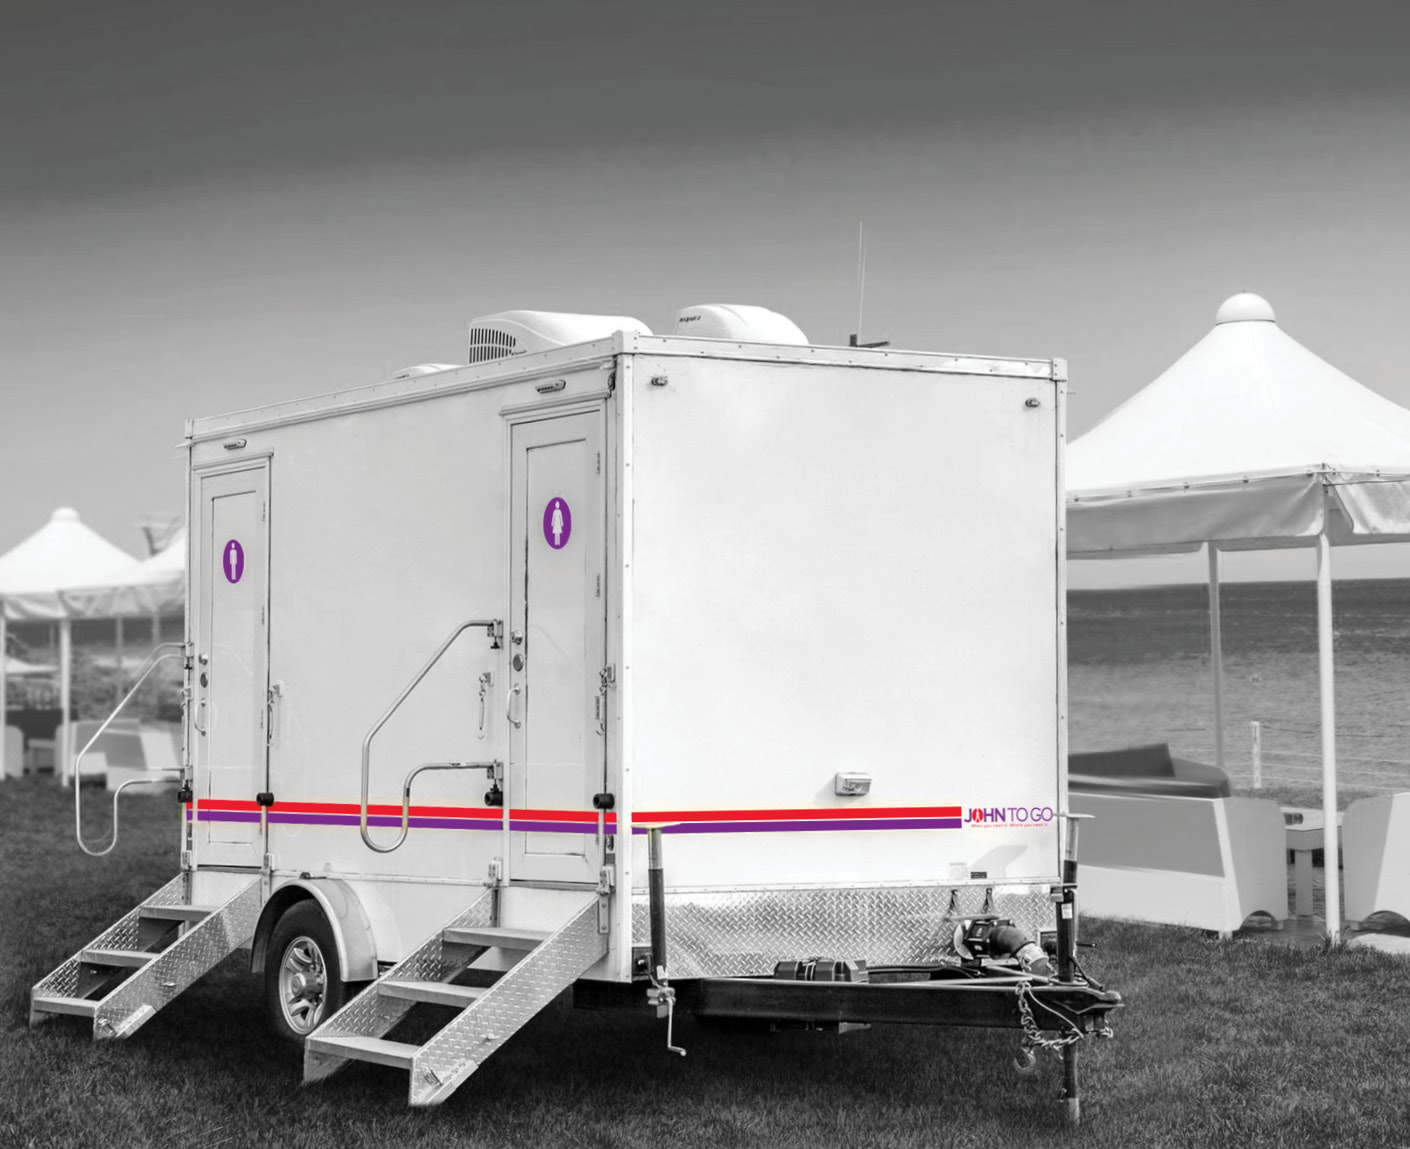 2 station mobile restroom trailer with changing rooms